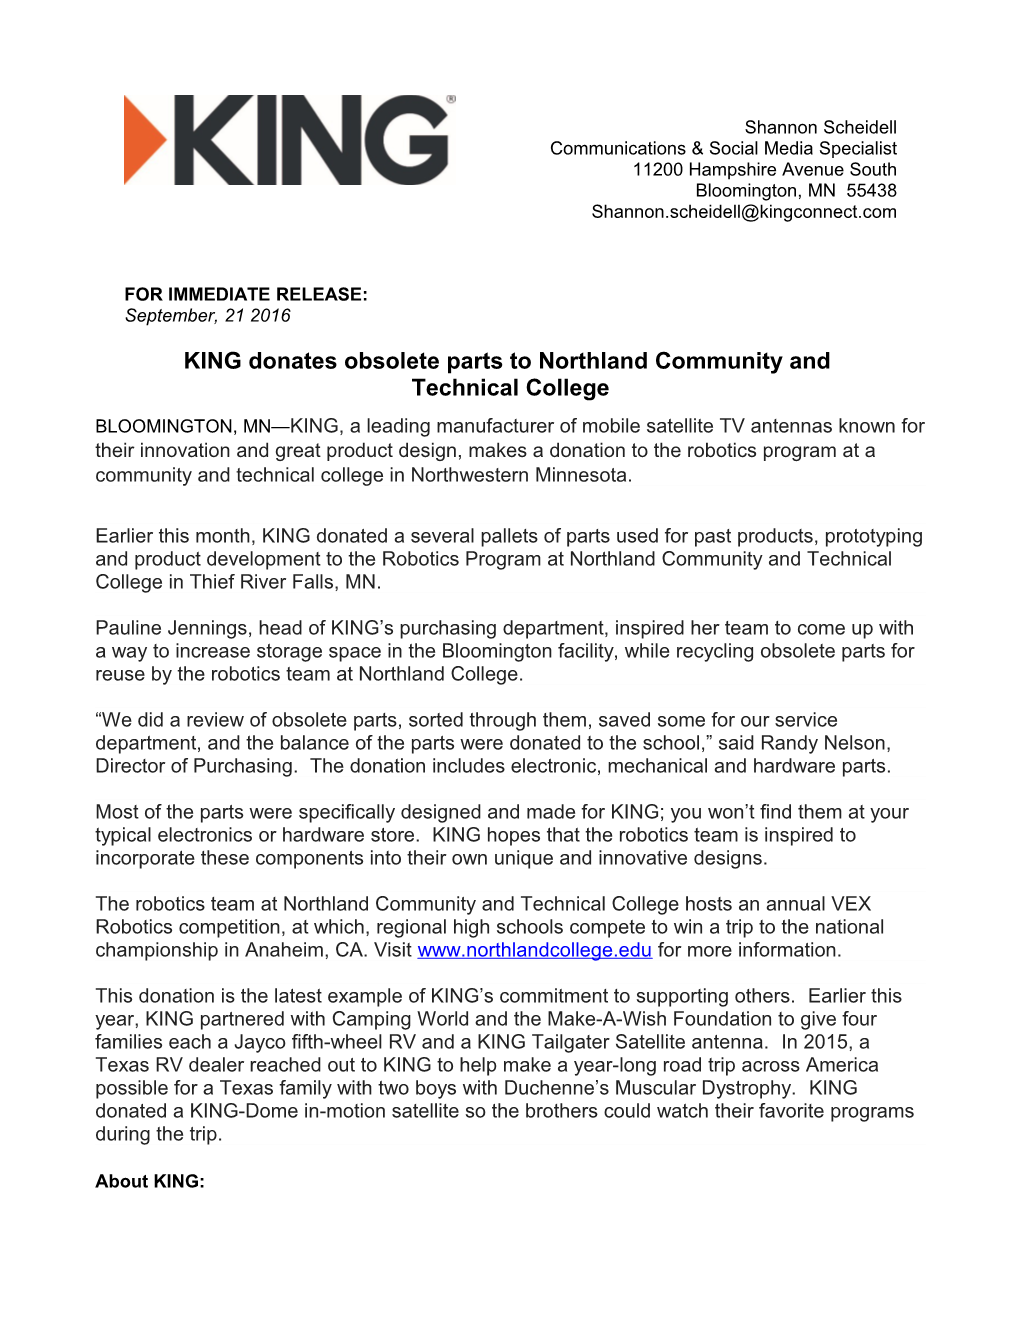 KING Donates Obsolete Parts to Northland Community and Technical College